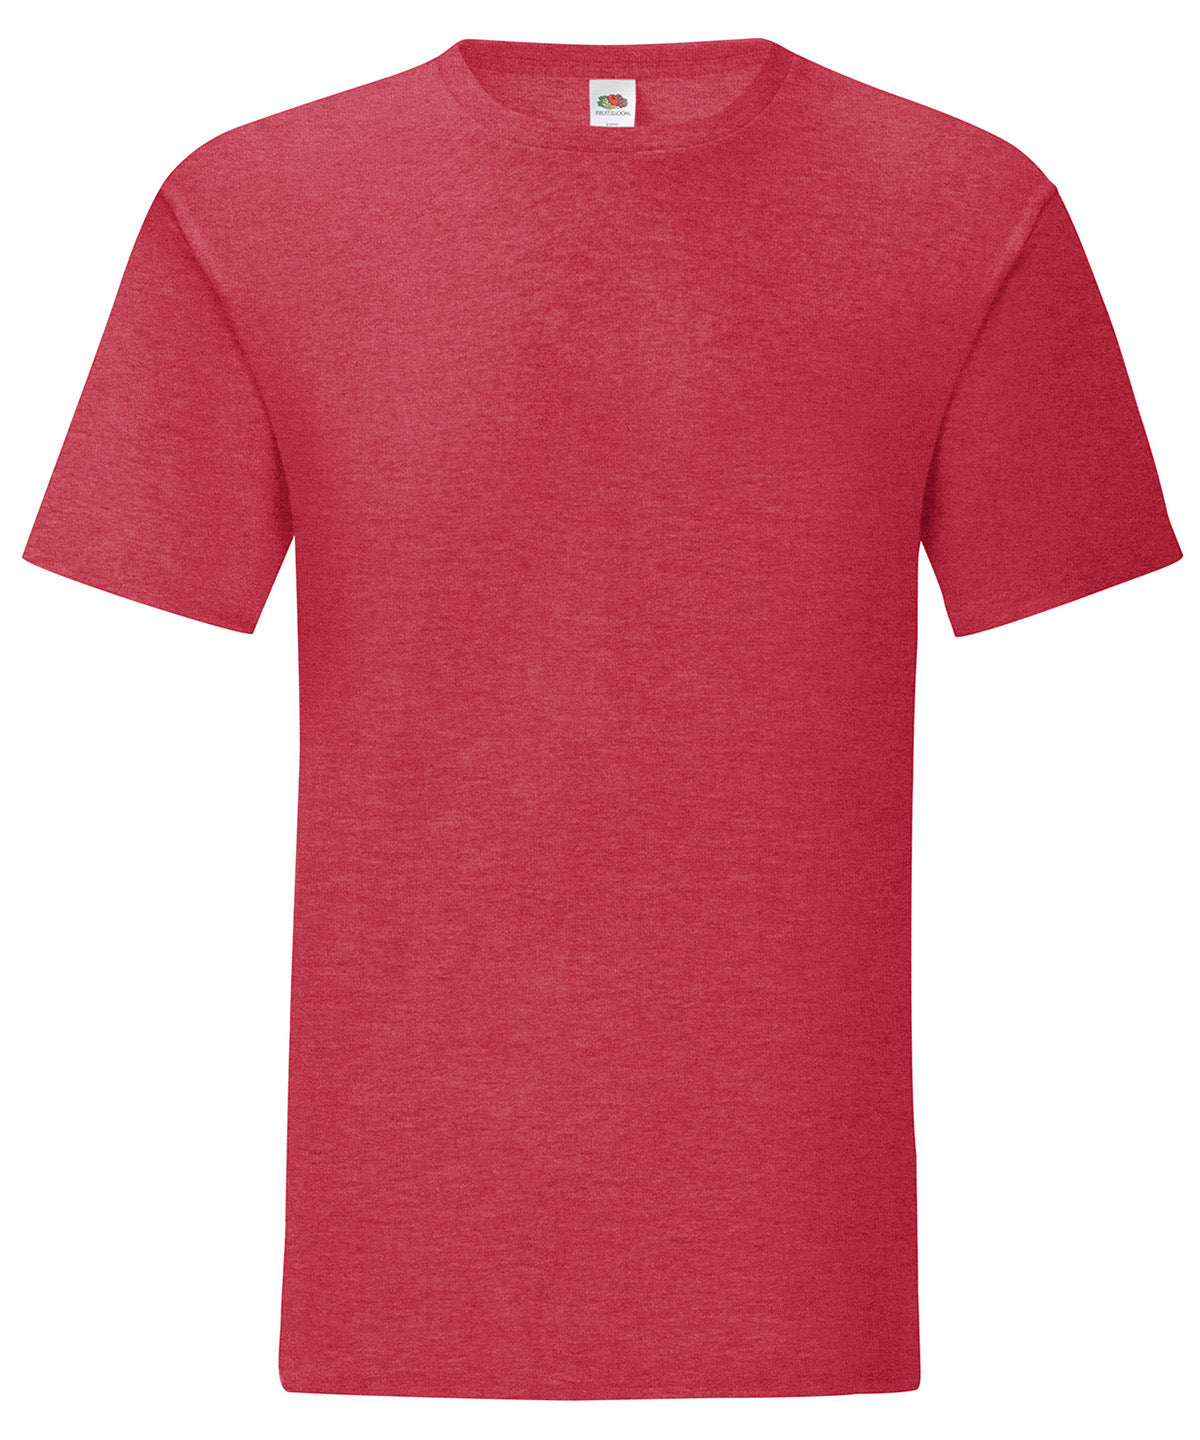 Fruit of the Loom Iconic 150 T Heather Red